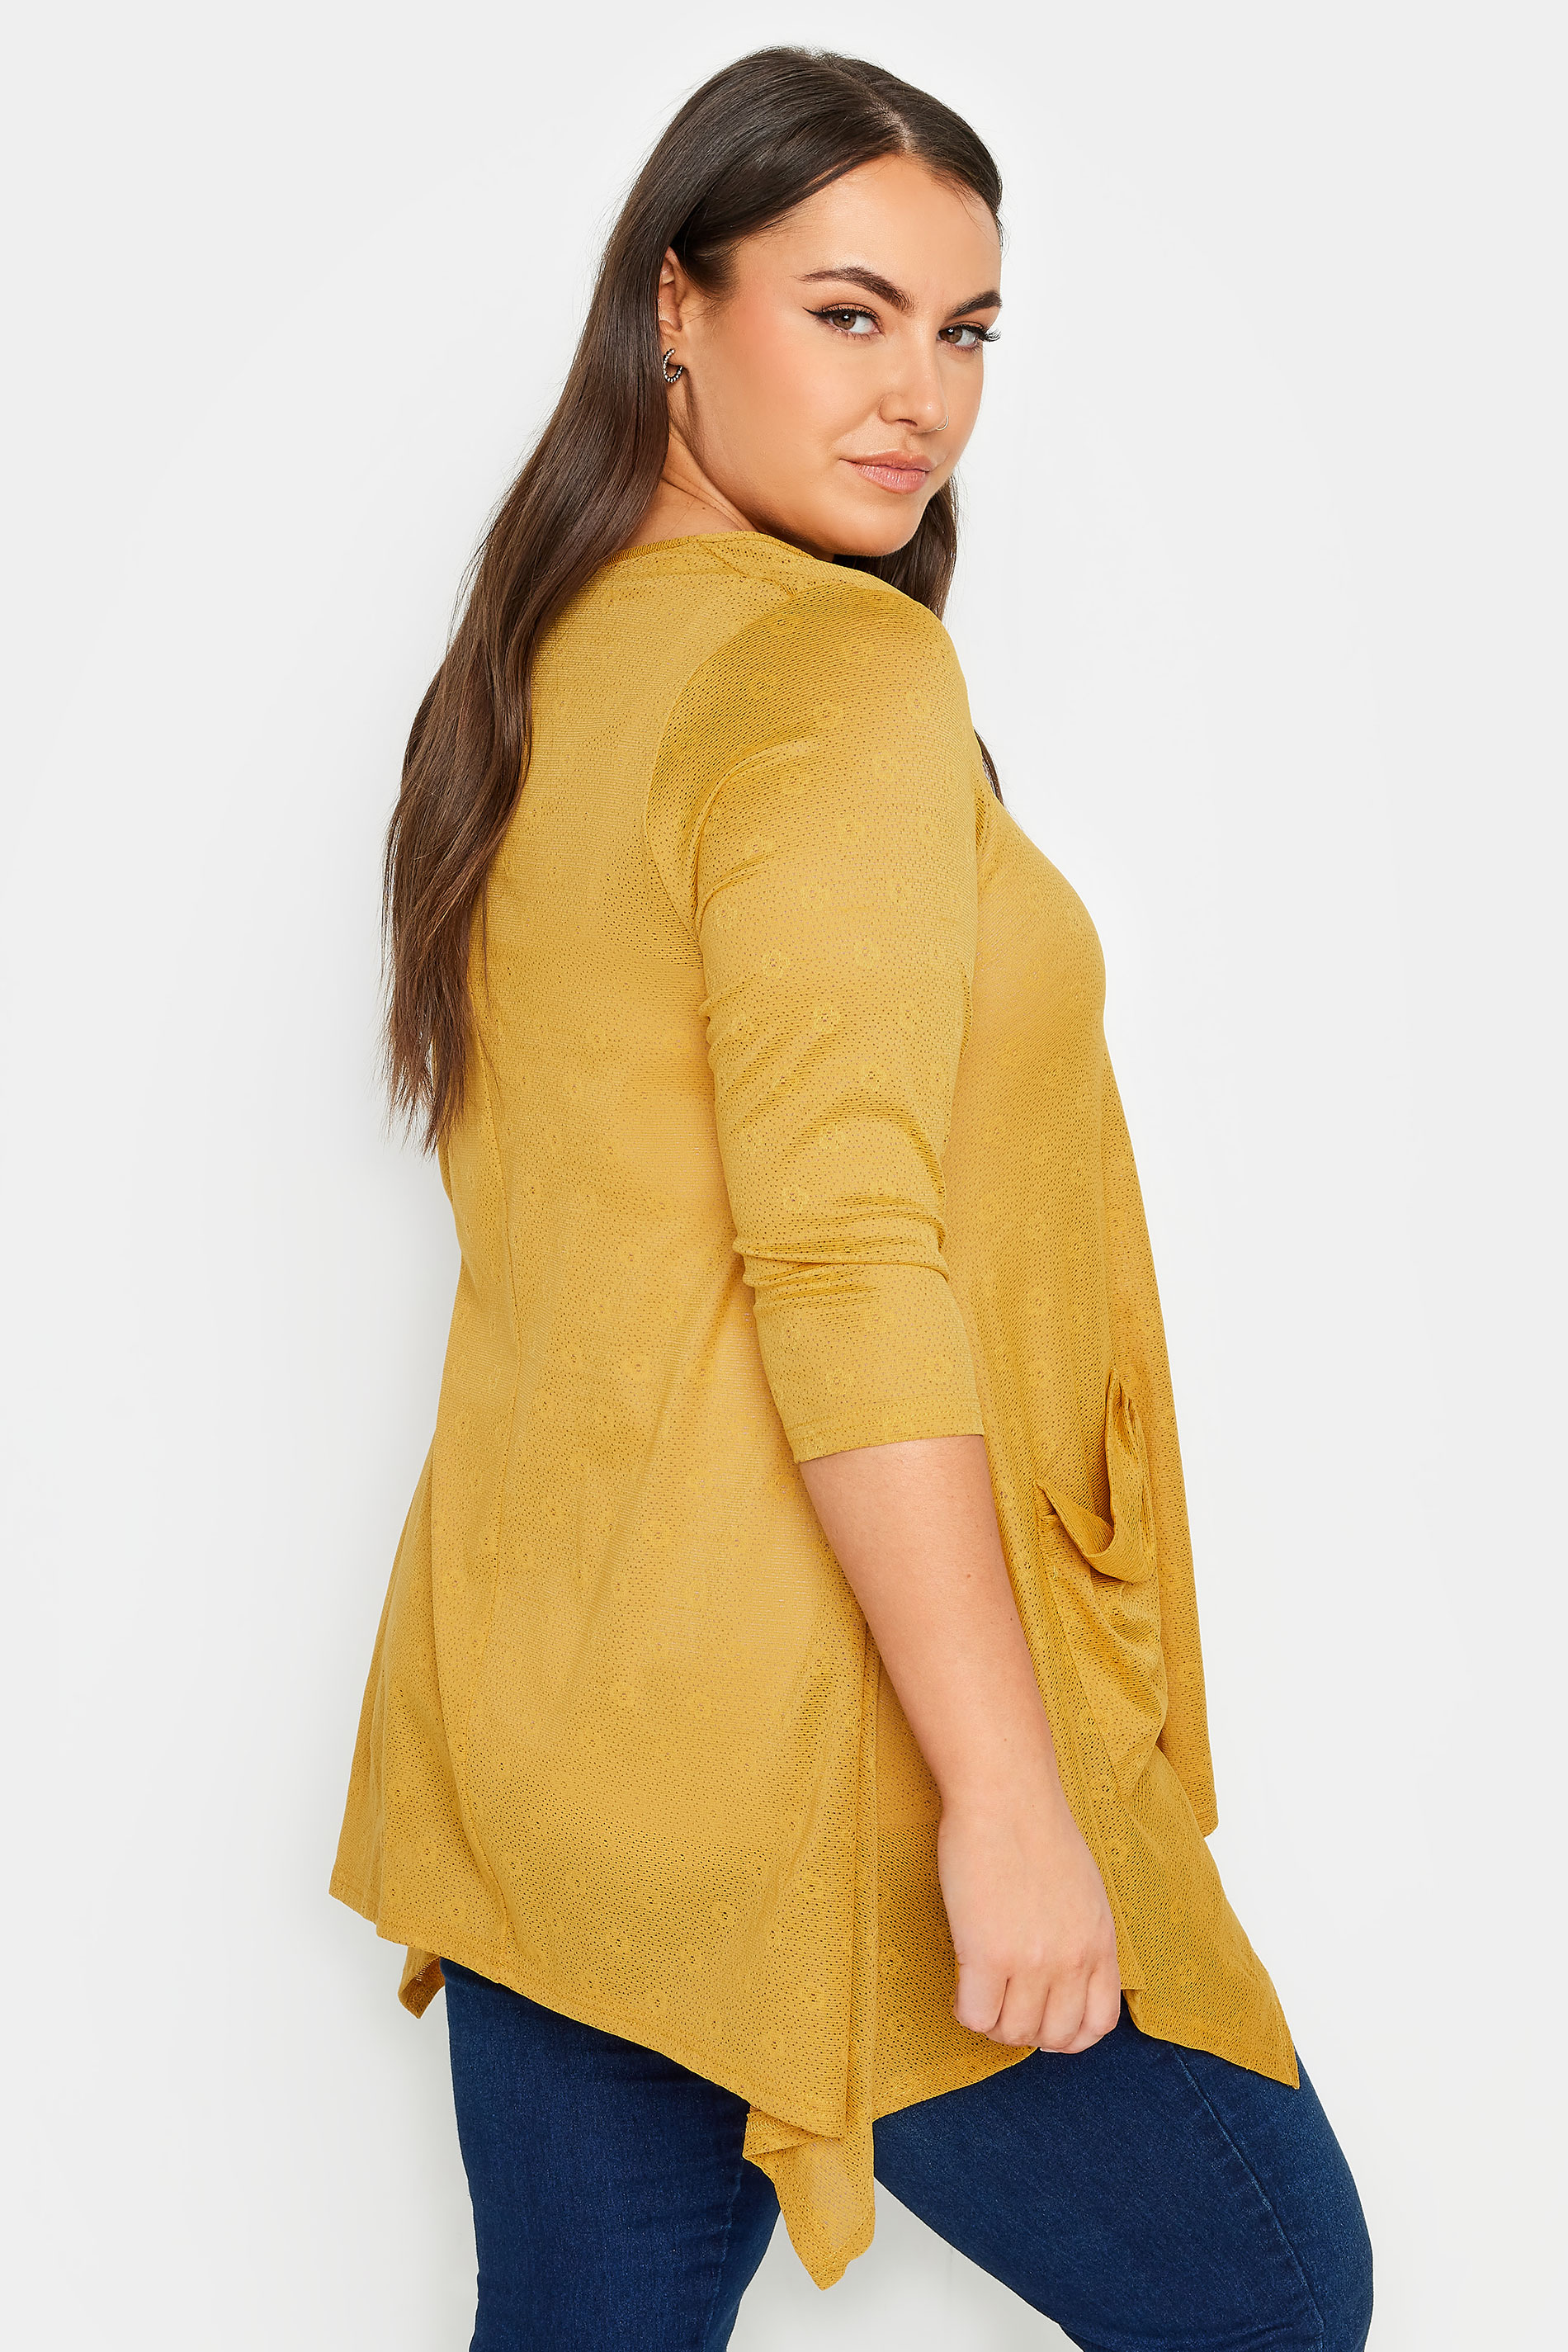 YOURS Plus Size Mustard Yellow Hanky Hem Pocket Top | Yours Clothing 3